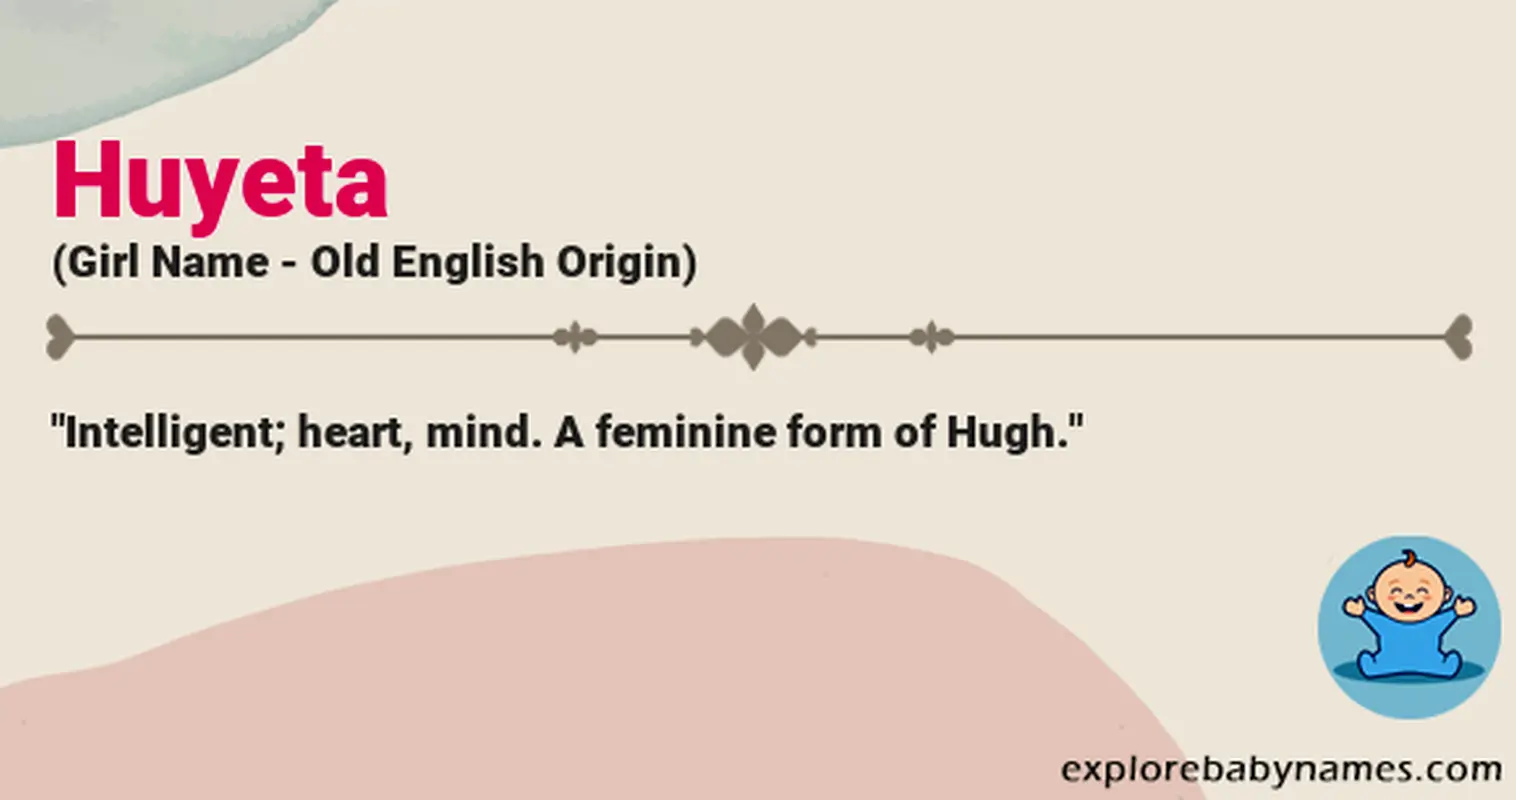 Meaning of Huyeta